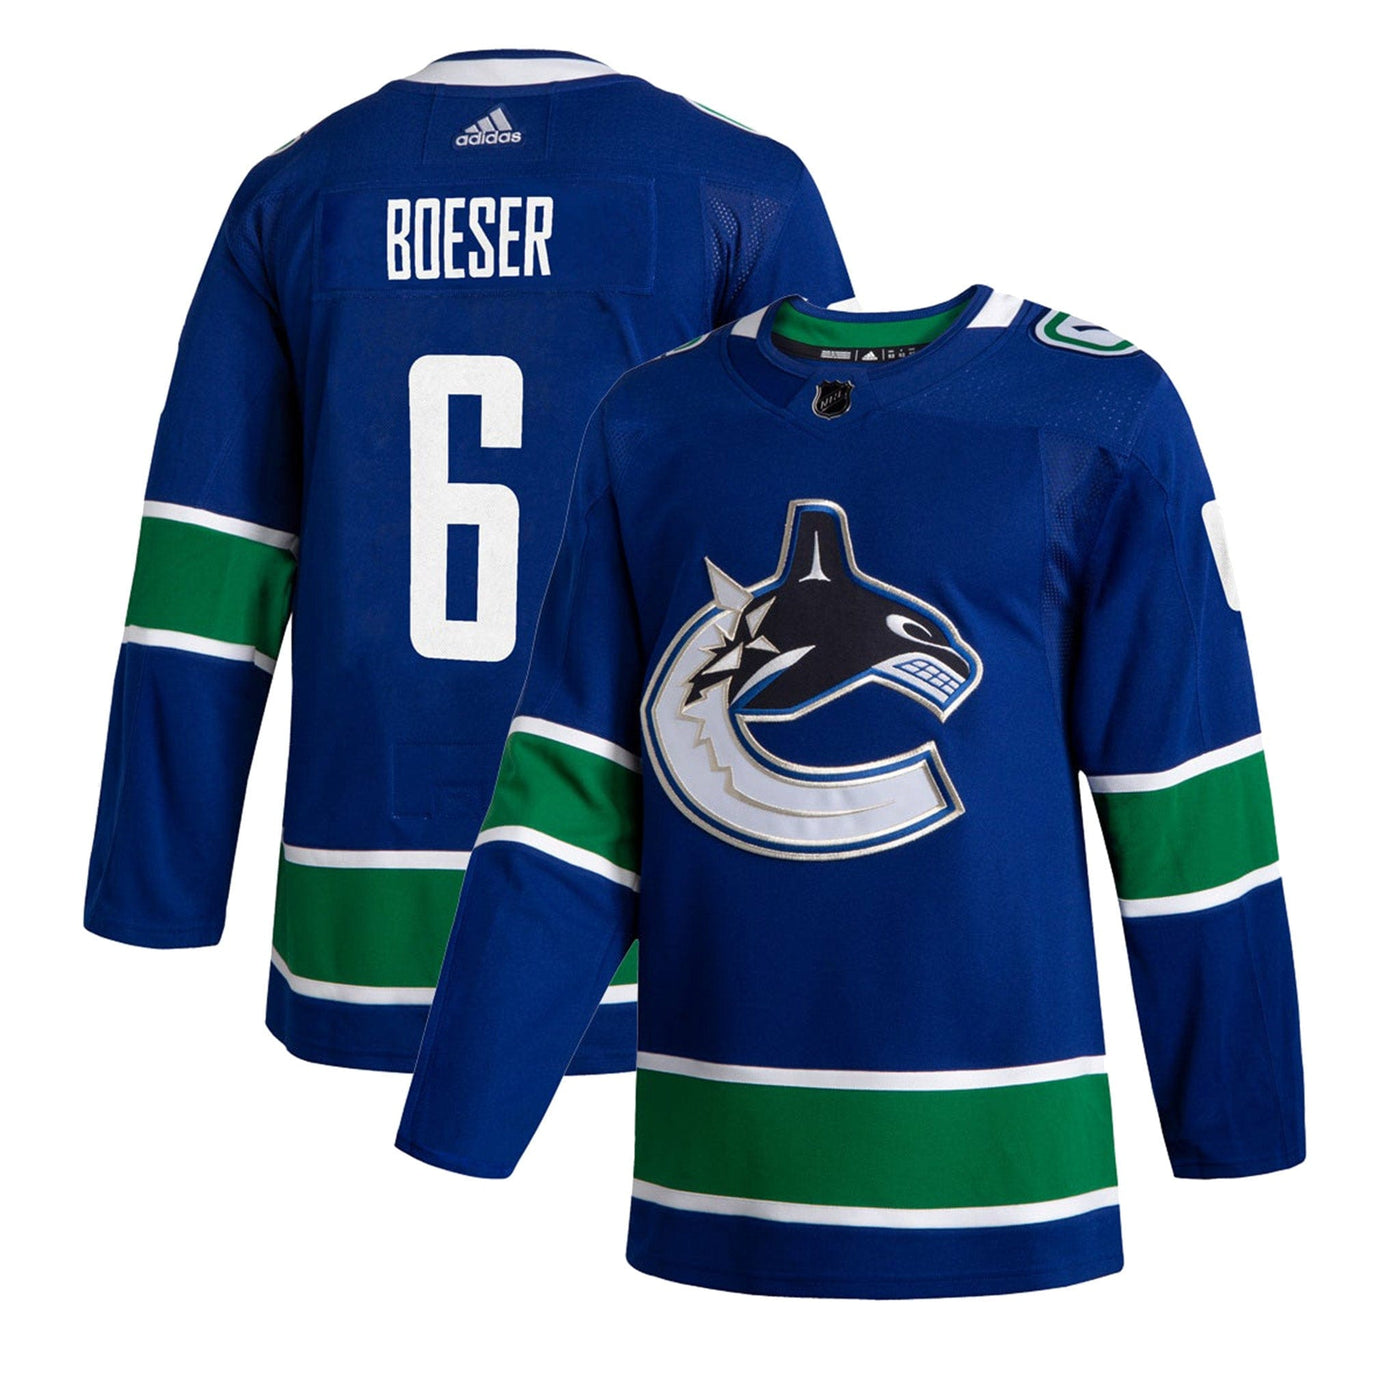 Vancouver Canucks Home Adidas Authentic Senior Jersey - Brock Boeser